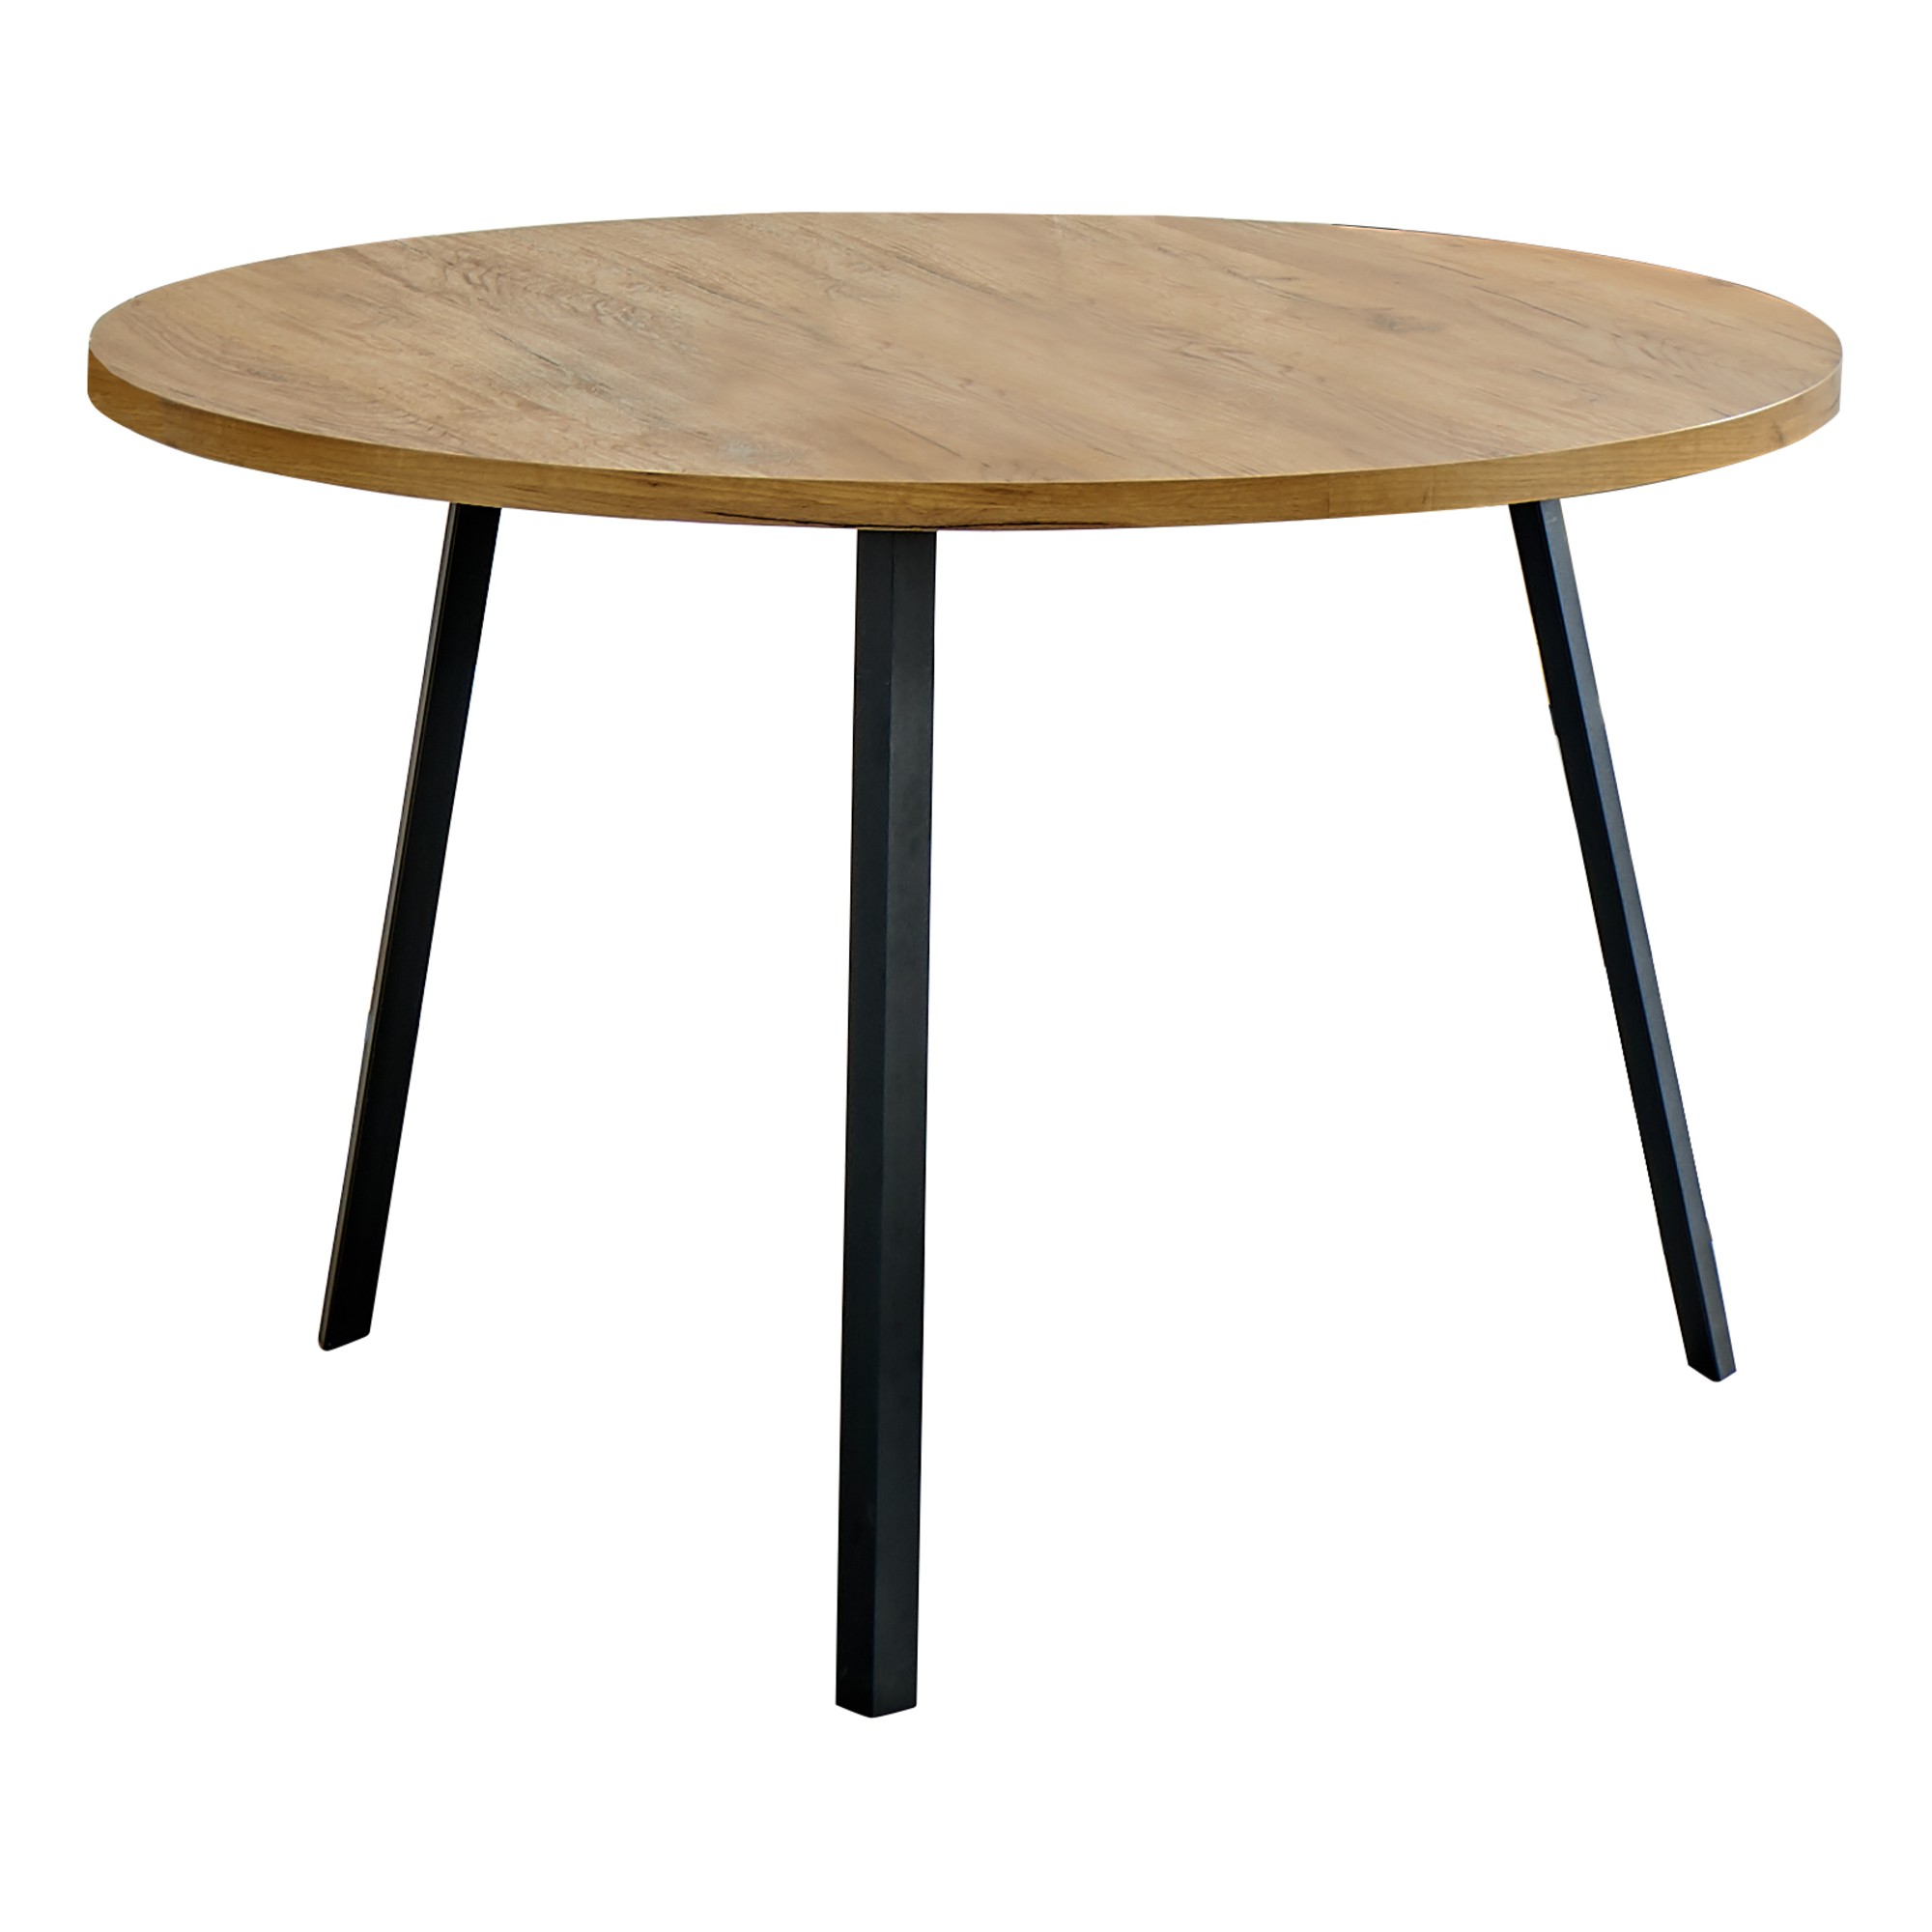 48" Round Dining Room Table with Golden Pine and Black Metal